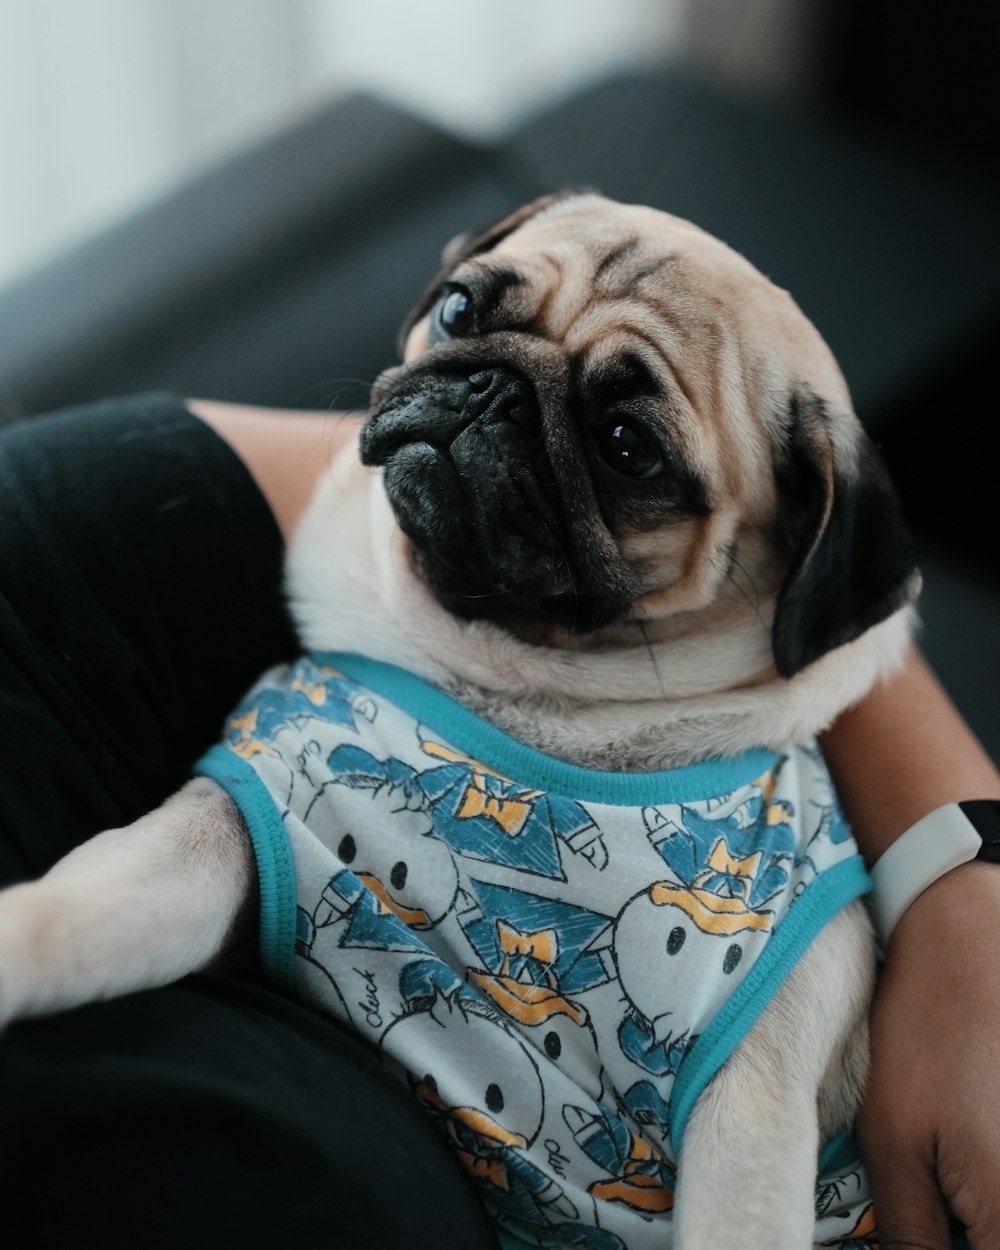 fawn pug wearing blue and white tank top